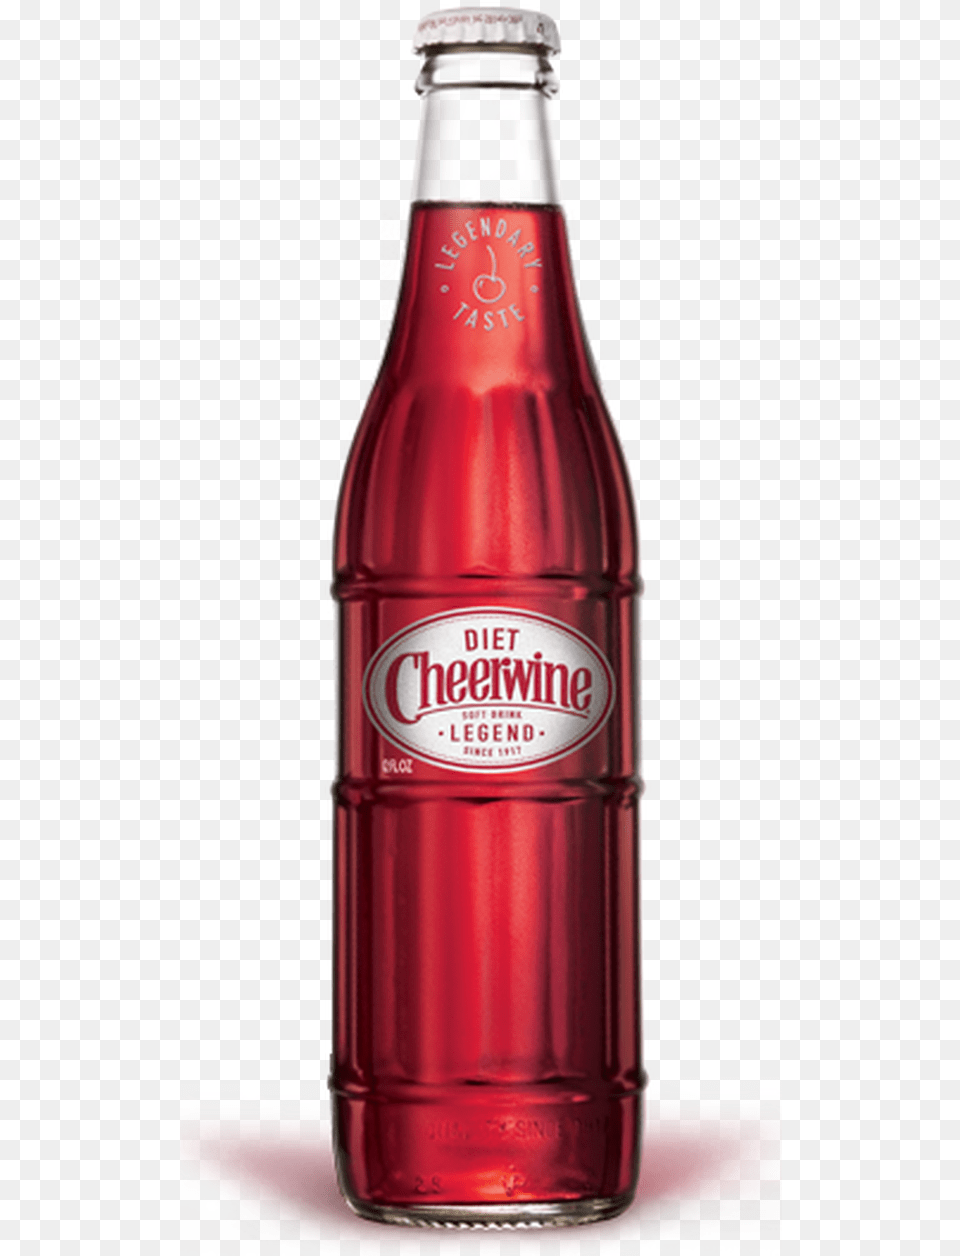 Cheerwine Glass Bottle, Beverage, Soda, Alcohol, Beer Png Image